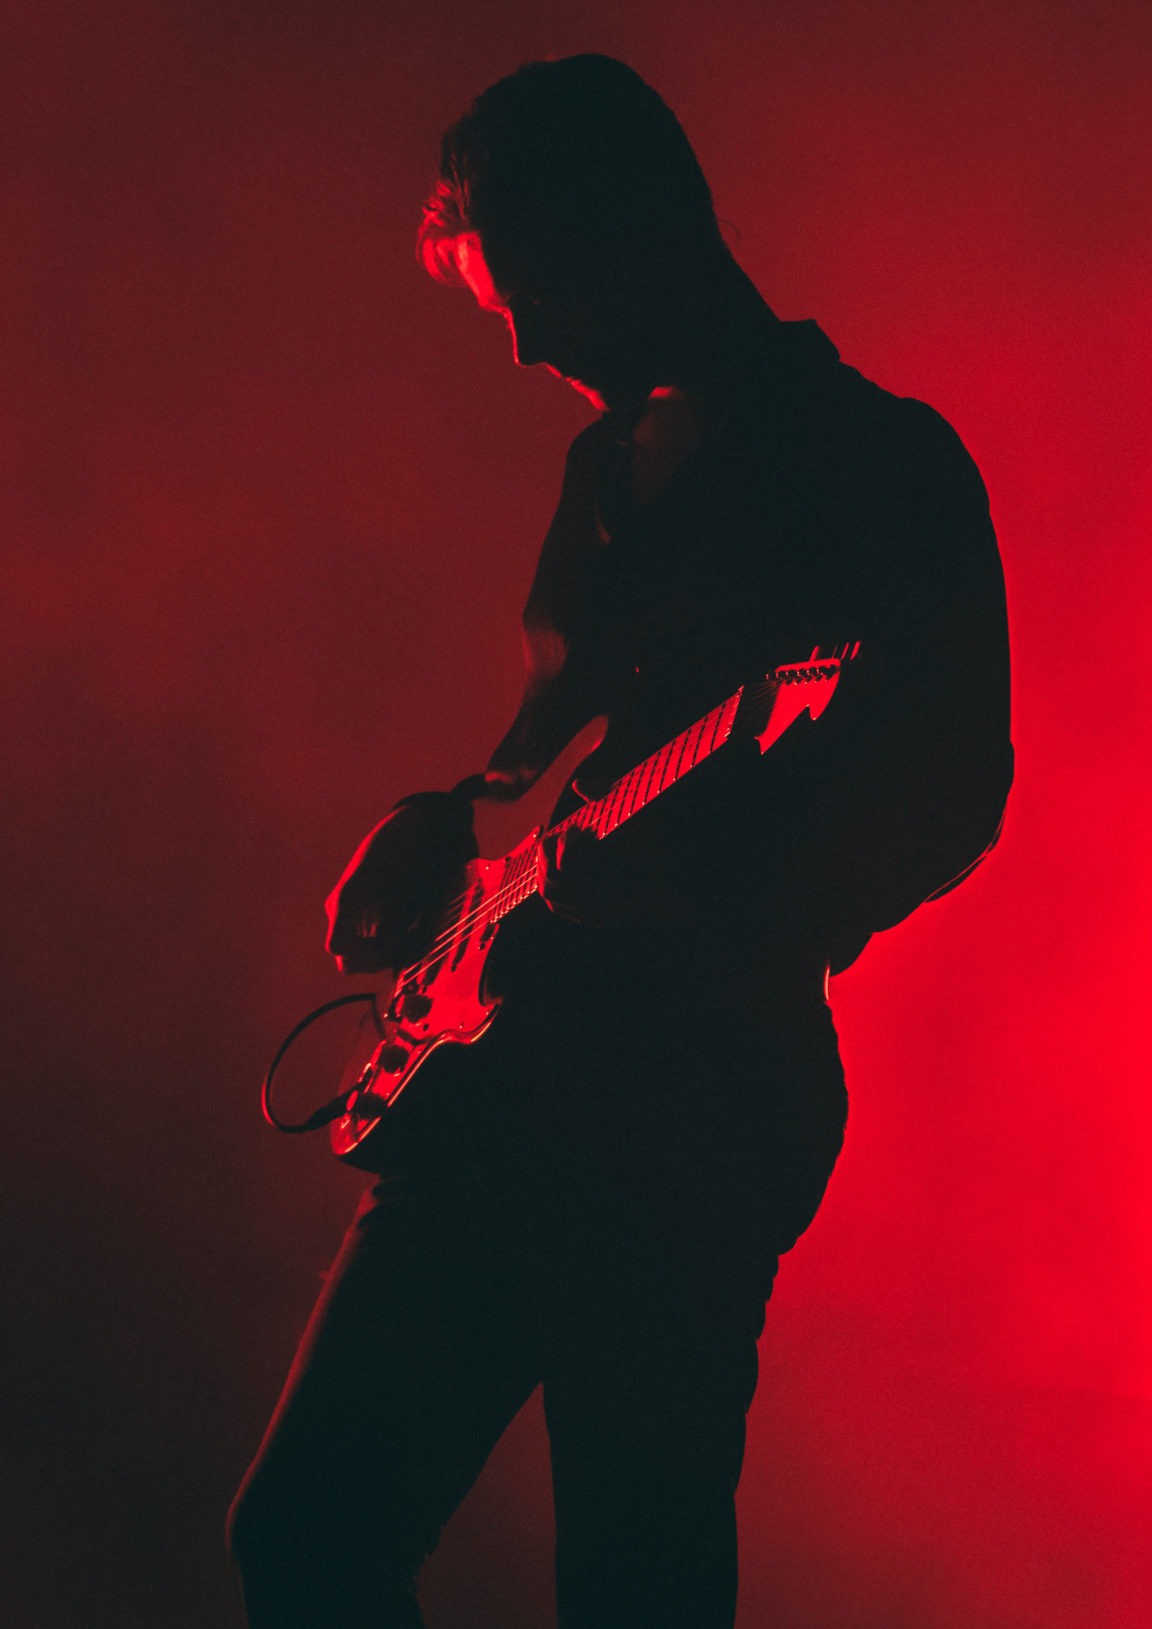 pale waves guitarist red silhouette